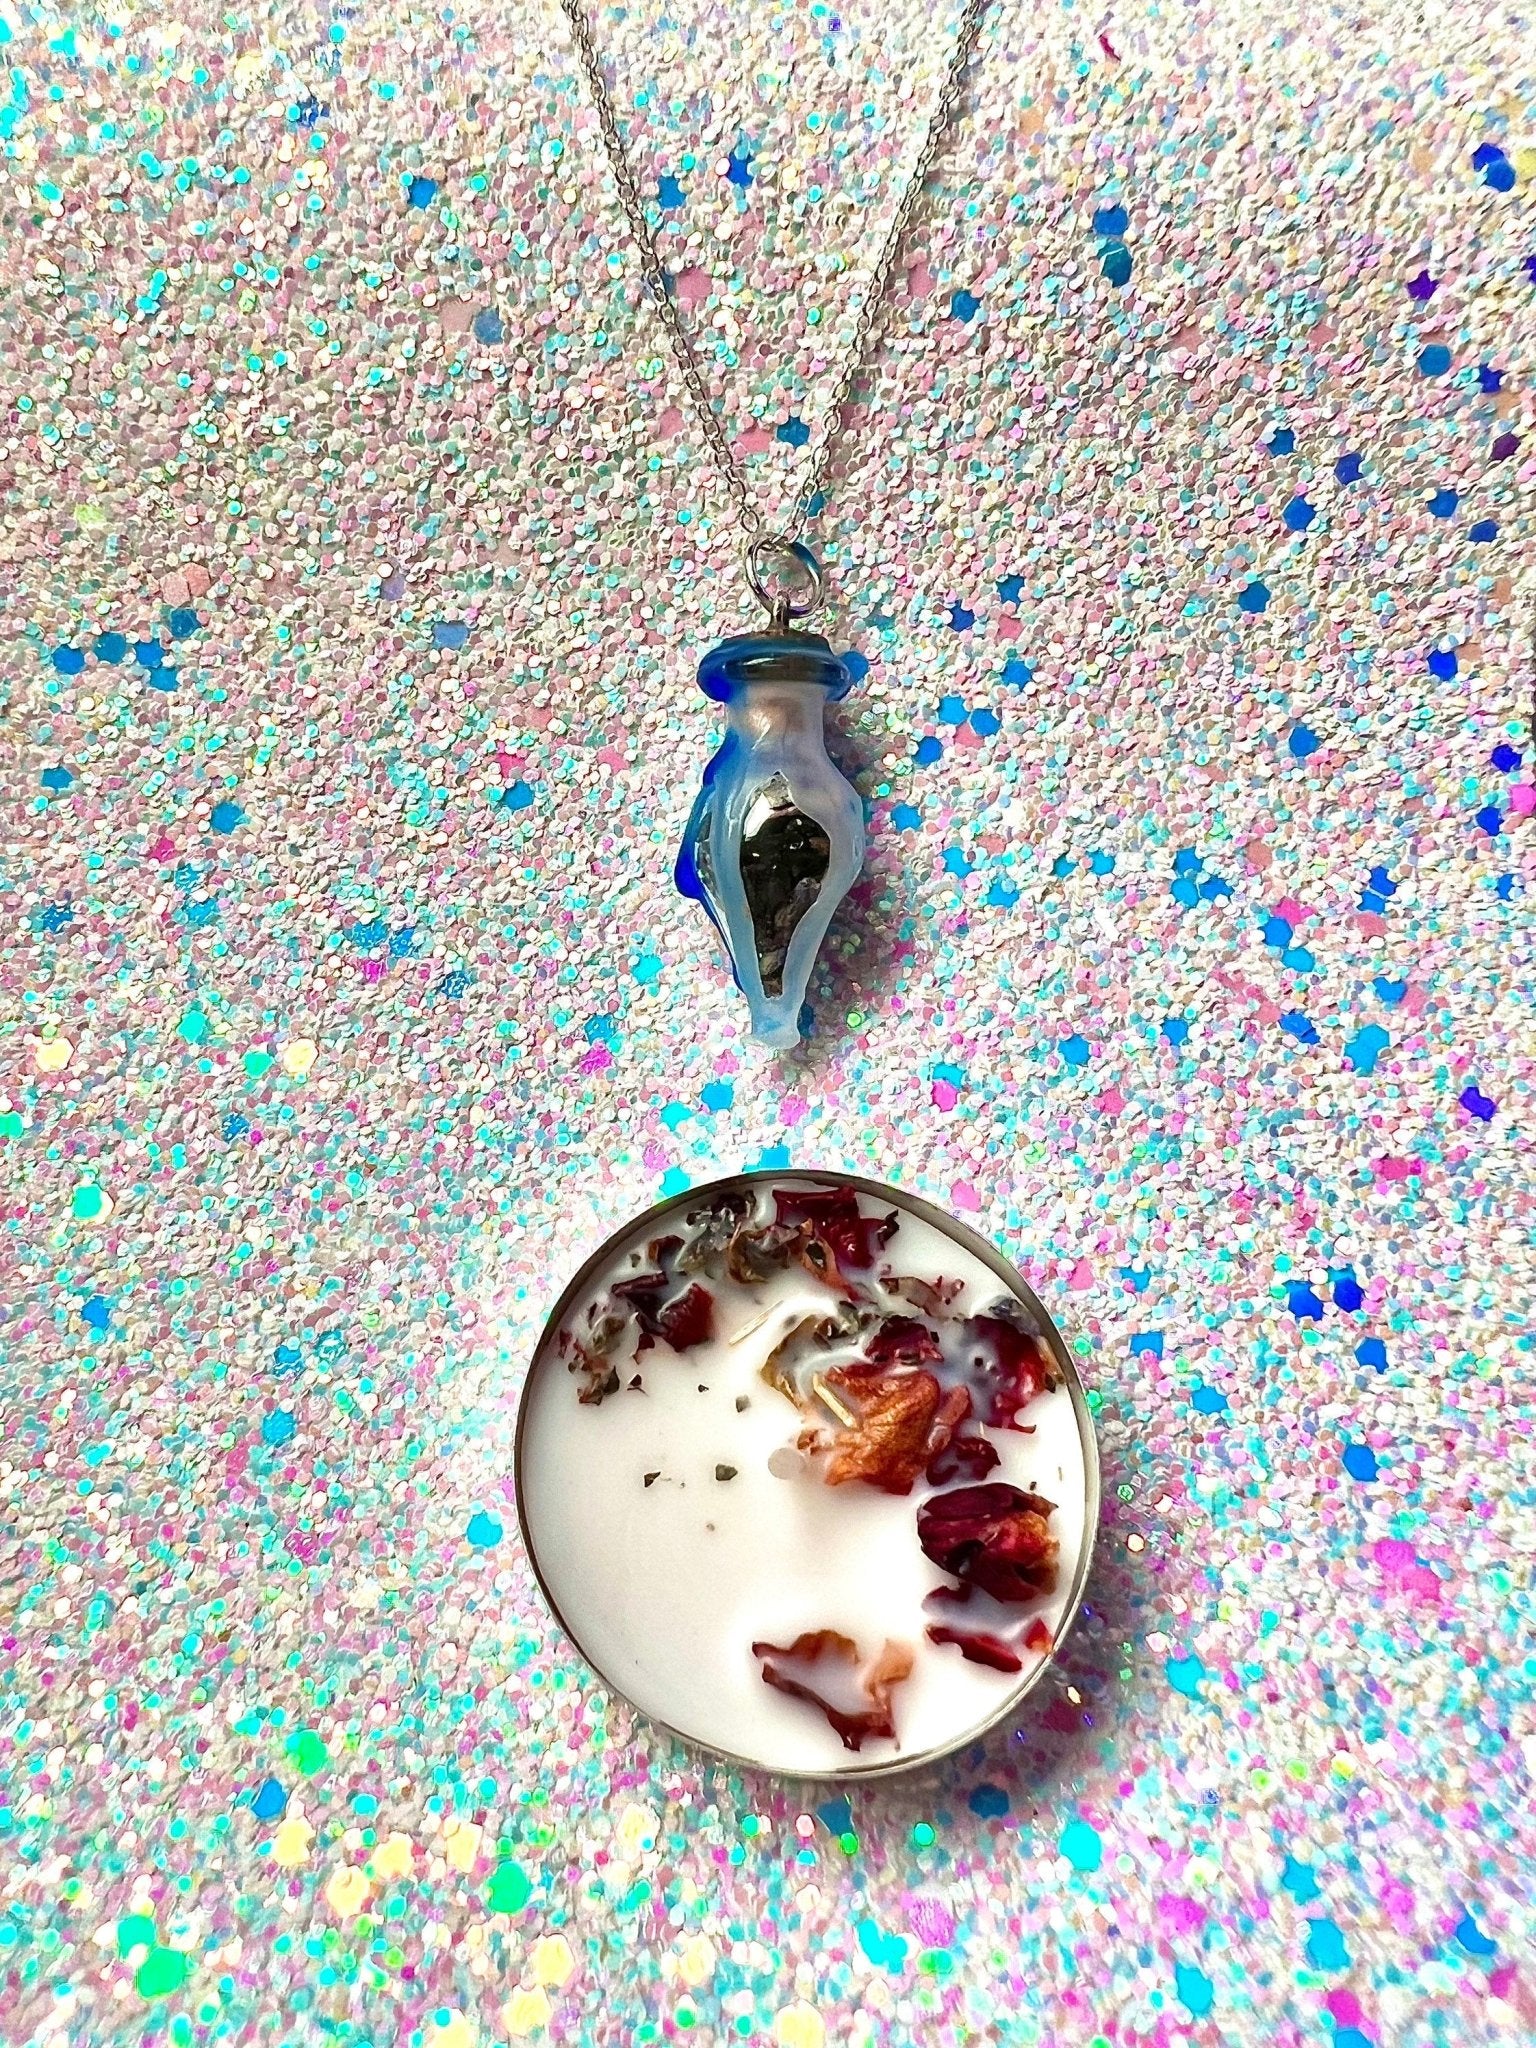 Healing Spell Jar Necklace - Hoodoo Jar Bottle Jewelry - Spiritual Healing - Emotional Wounds - Relationship Blessed Sterling Silver Chain - MysticBluuMoonTarot